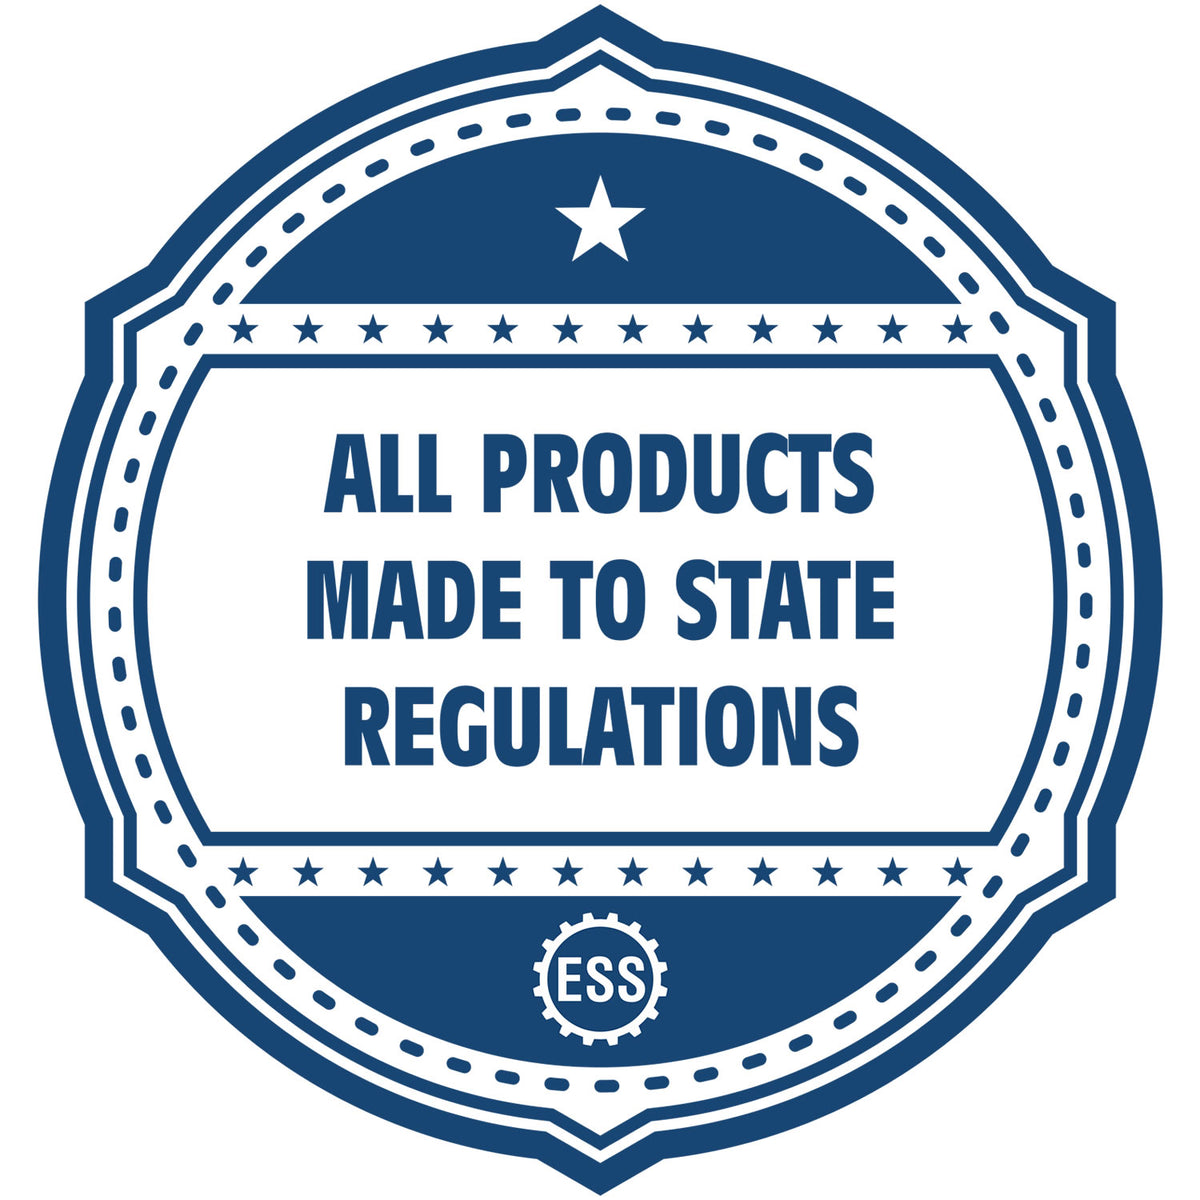 A blue icon or badge for the Hybrid Louisiana Landscape Architect Seal showing that this product is made in compliance with state regulations.